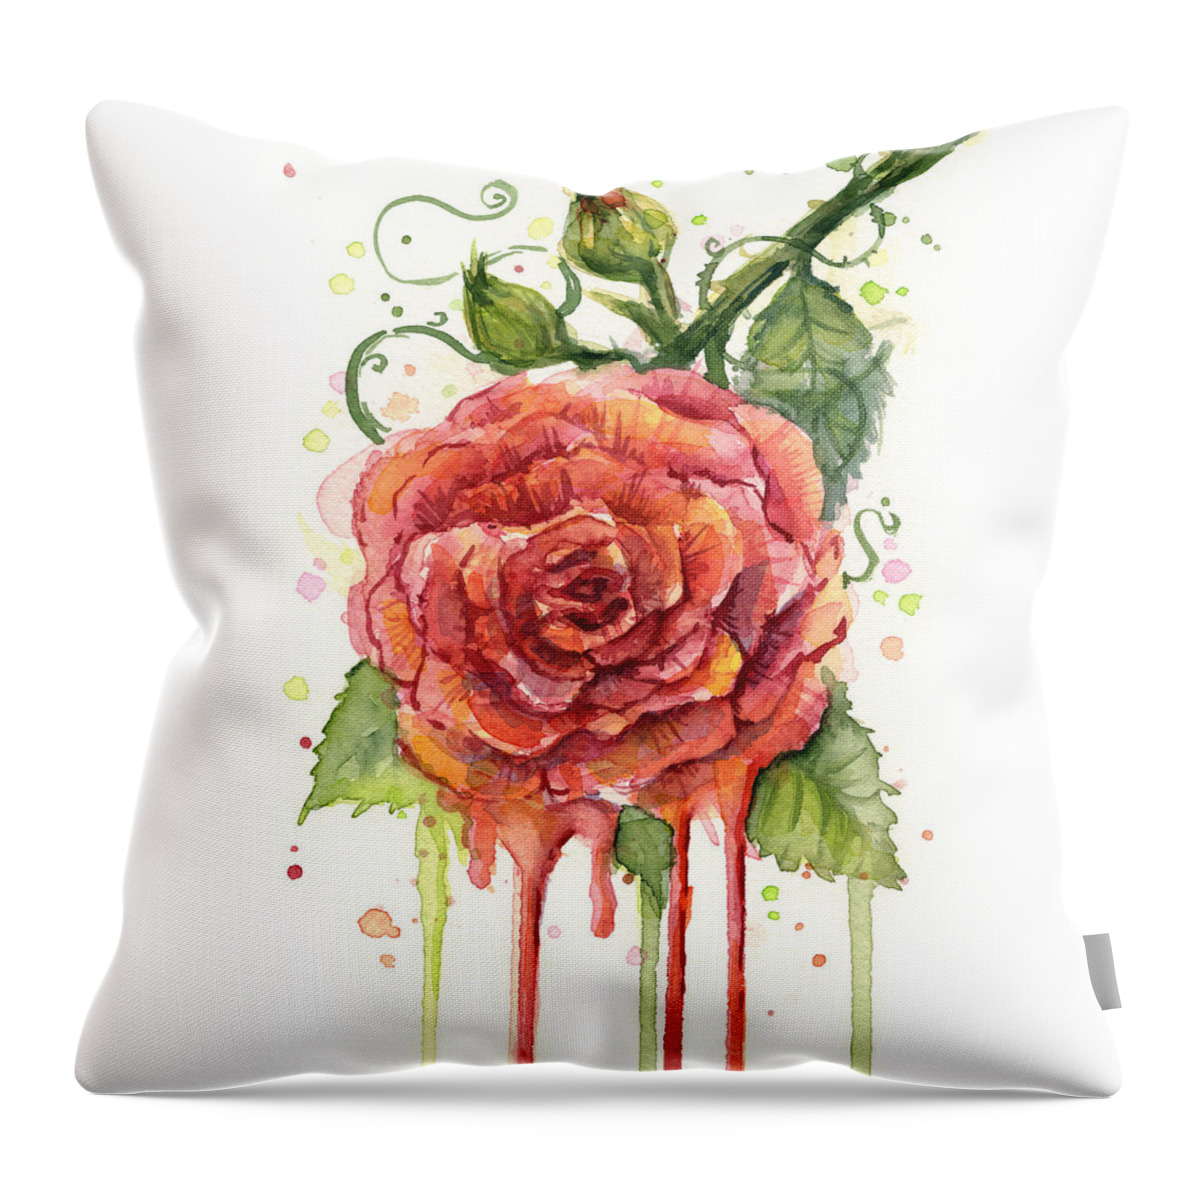 Rose Throw Pillow featuring the painting Red Rose Dripping Watercolor by Olga Shvartsur